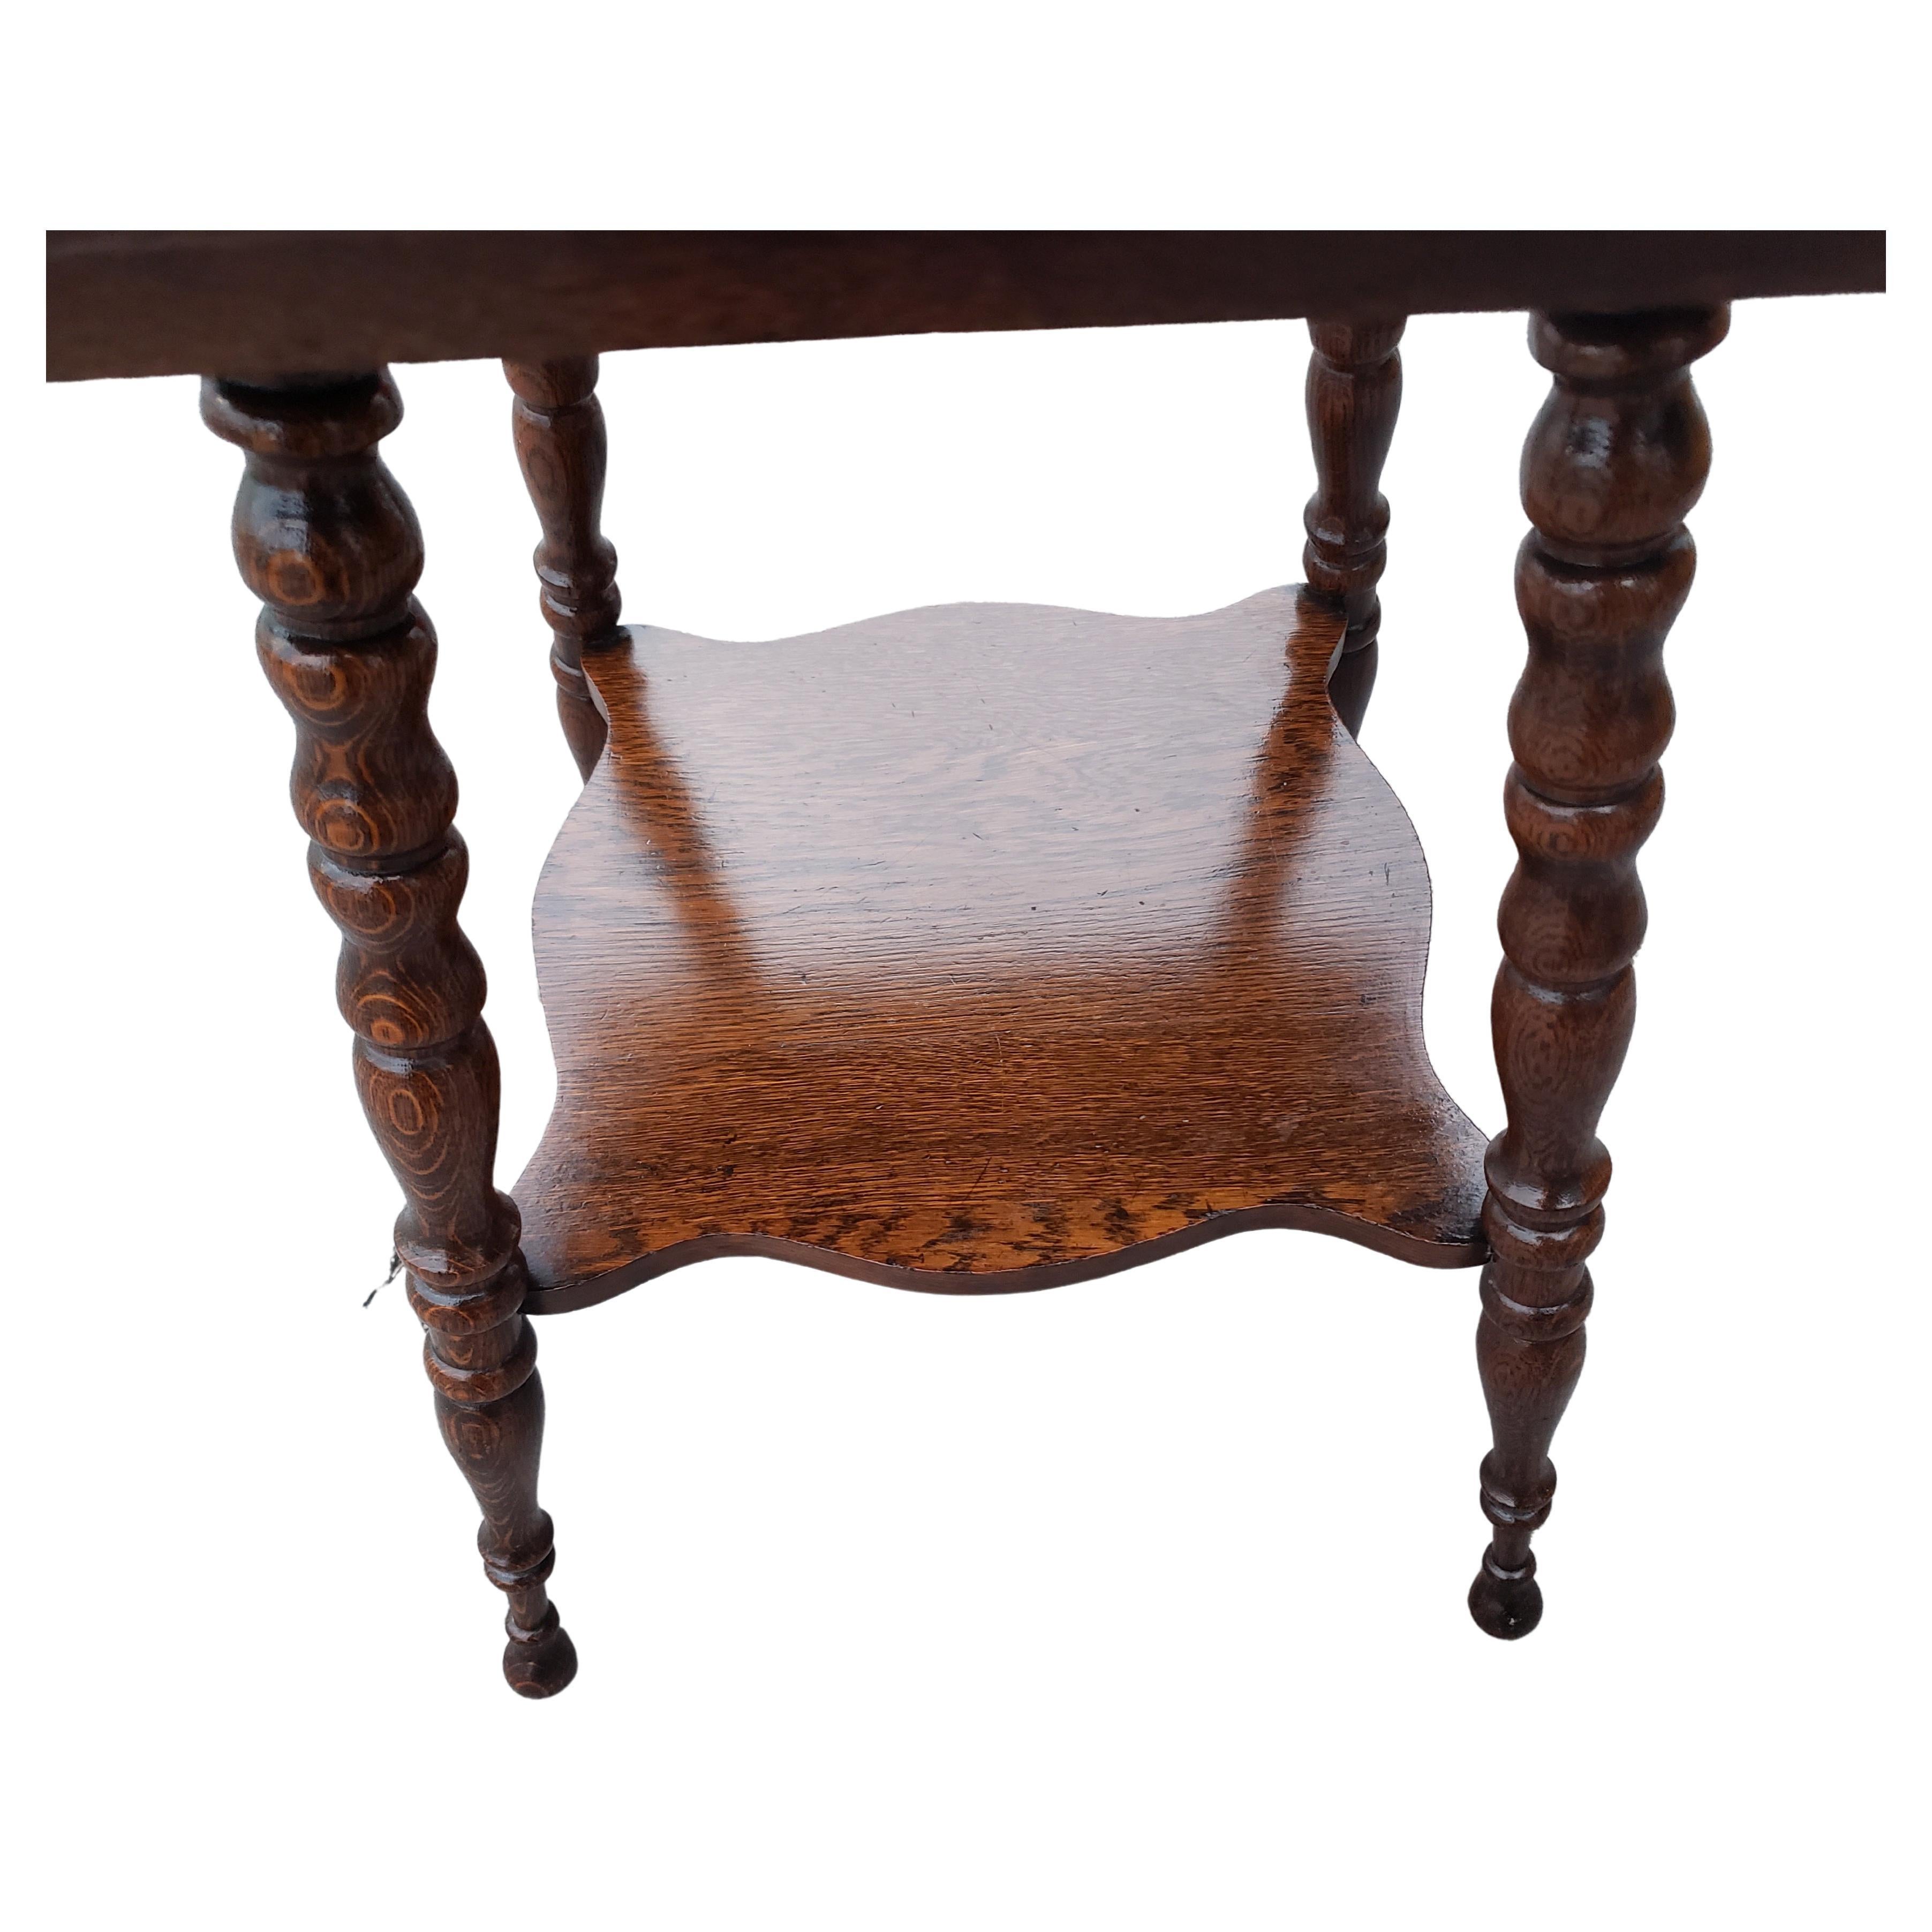 American Colonial 1940s Square Quarter Sawn Tiger Oak Two-Tier Parlor Table with Bobbin Legs